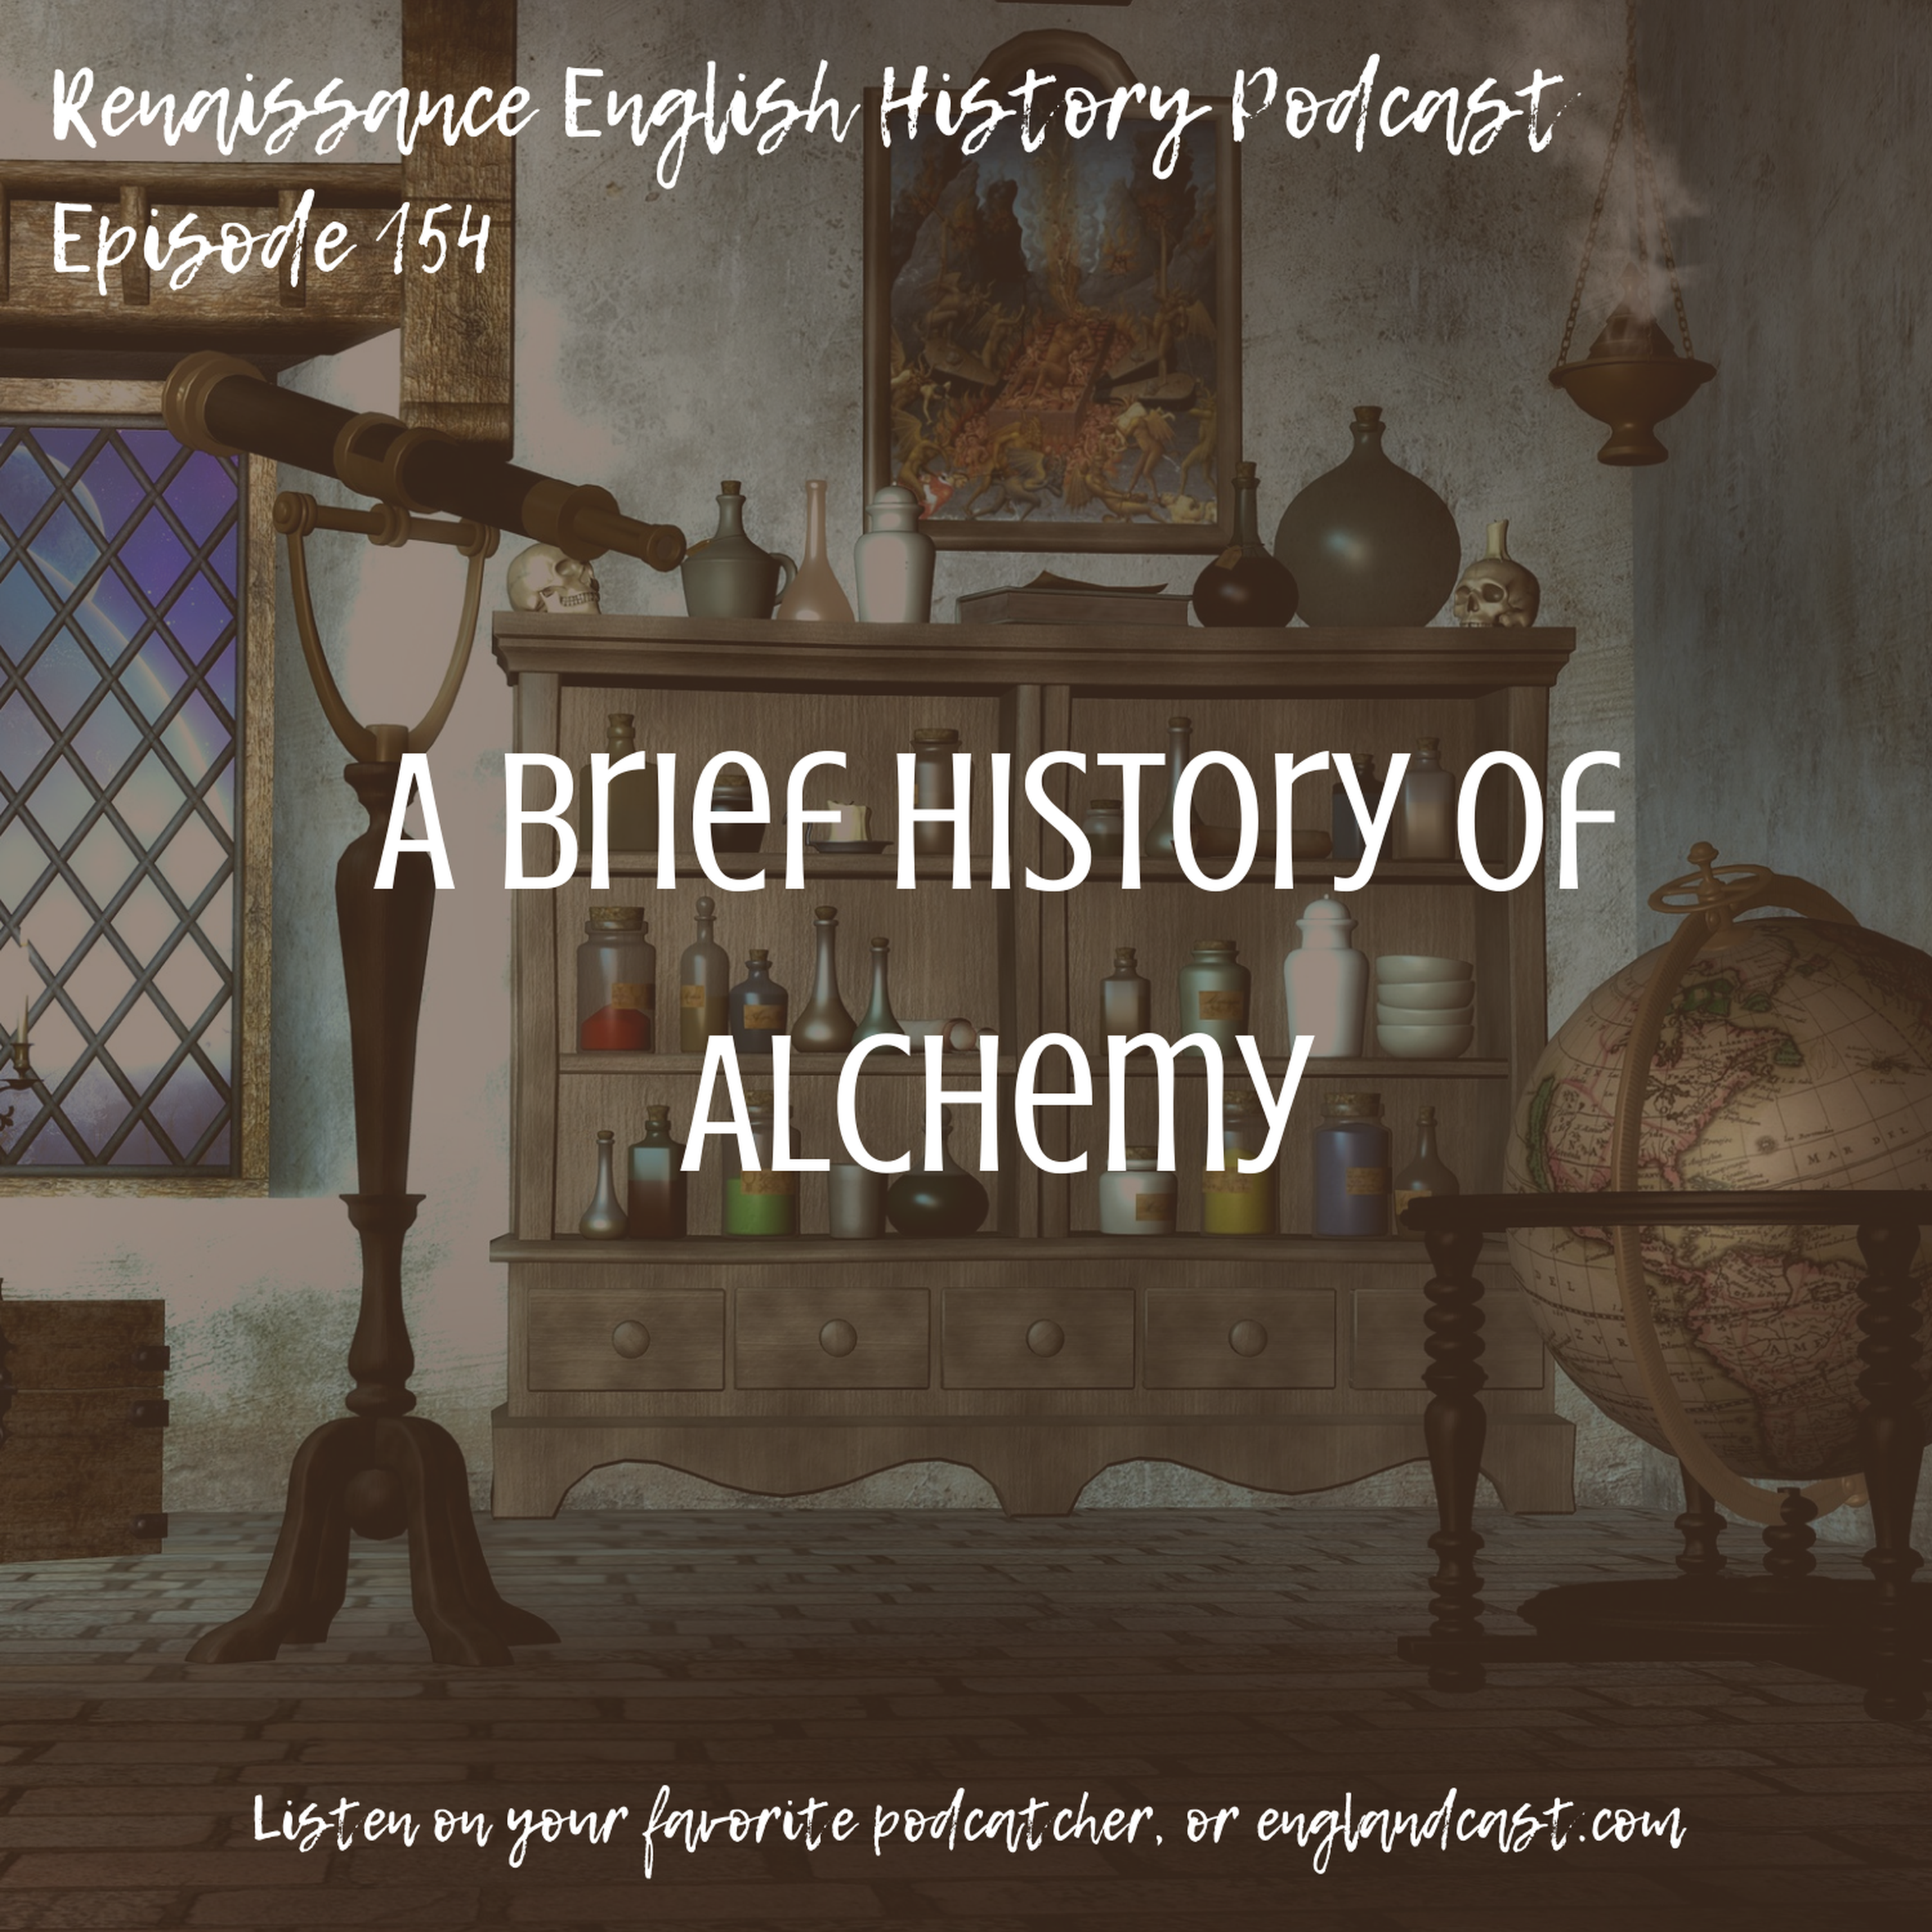 Episode 154: A brief history of Alchemy